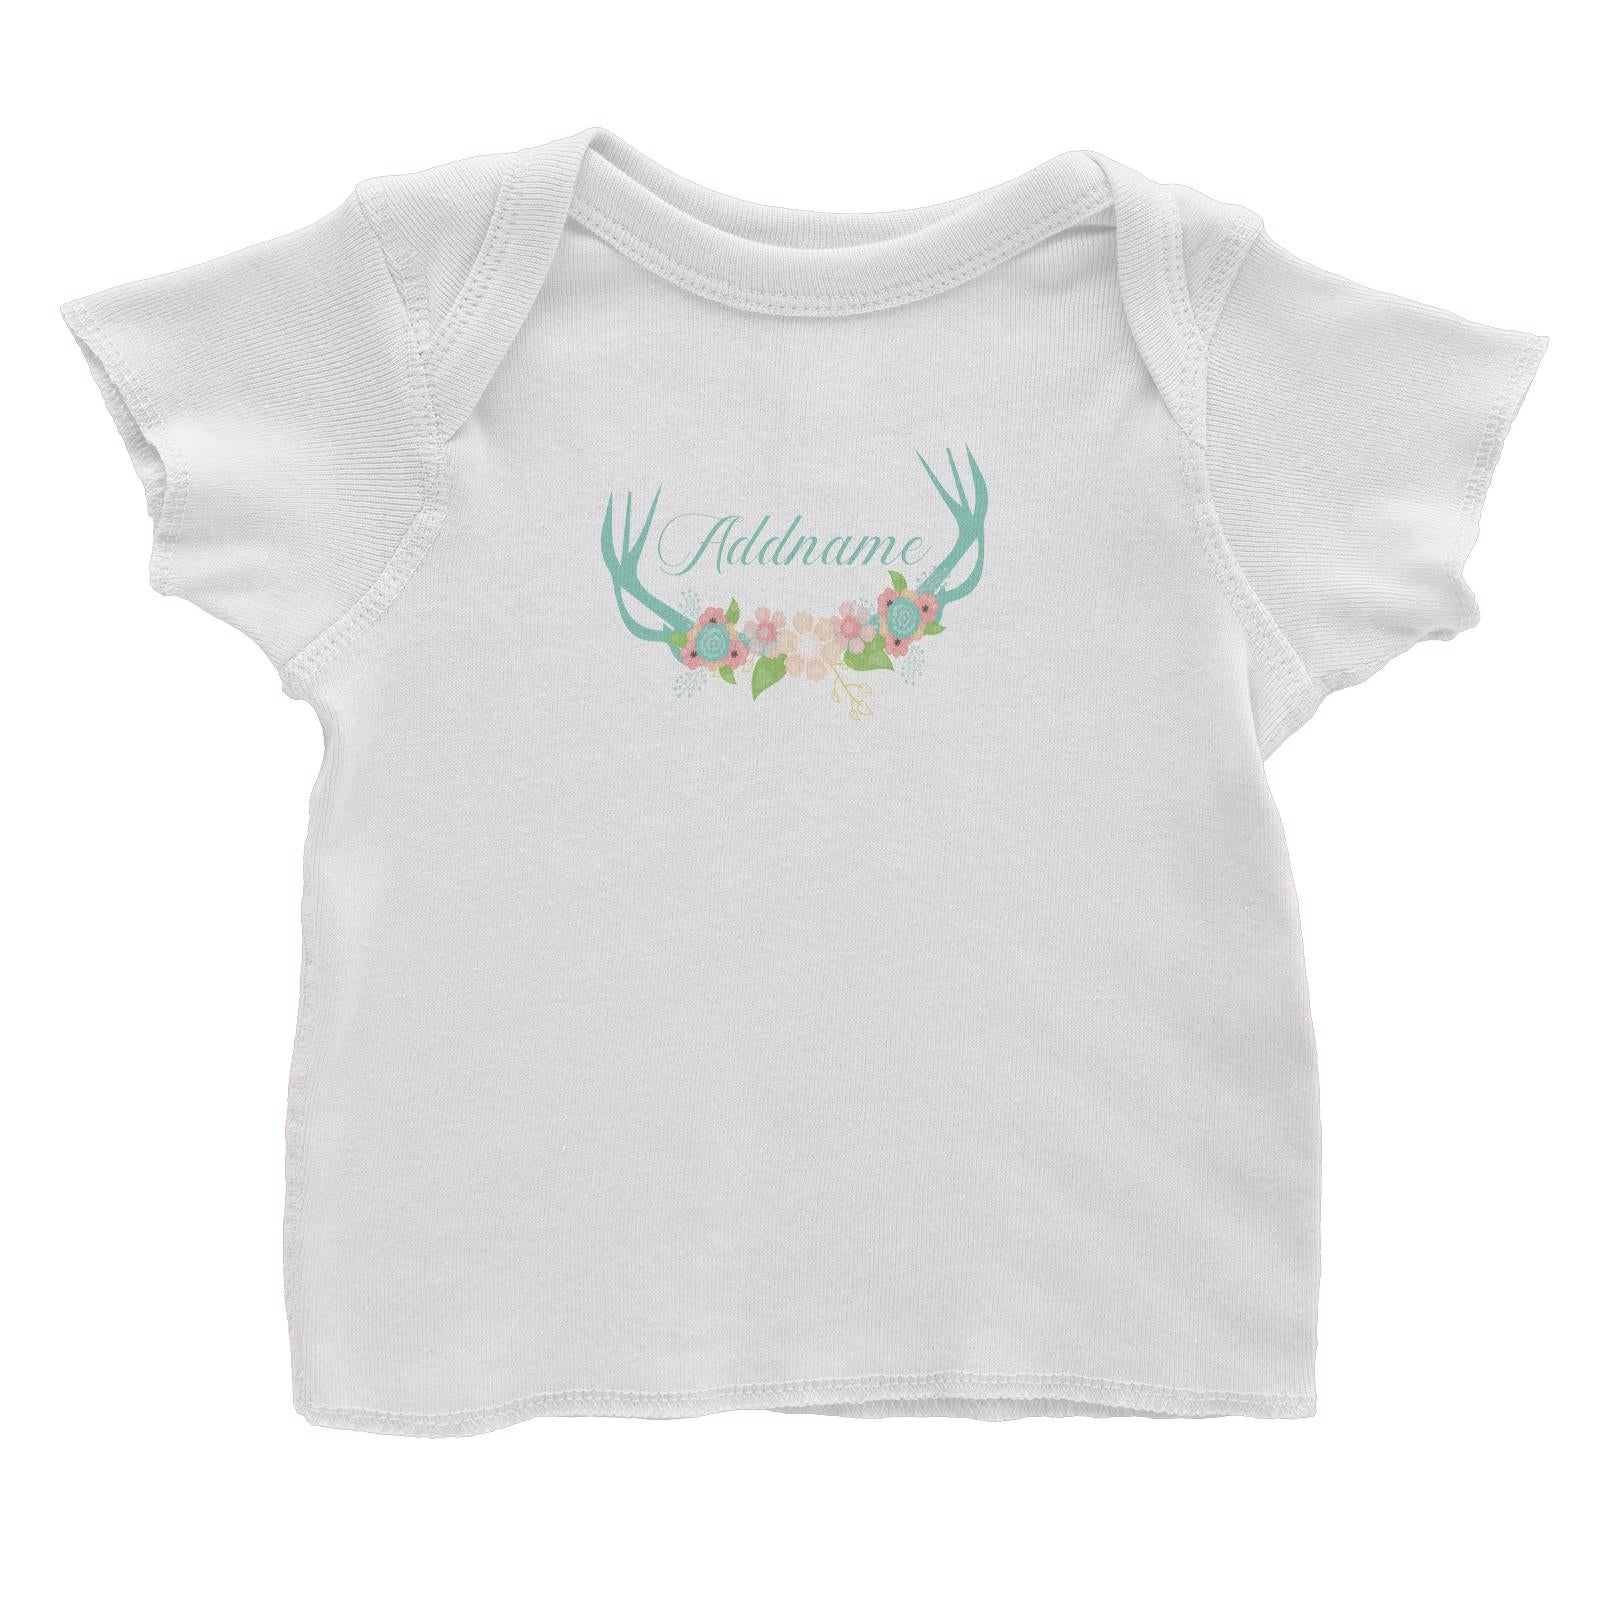 Basic Family Series Pastel Deer Green Deer Antlers With Flower Addname Baby T-Shirt